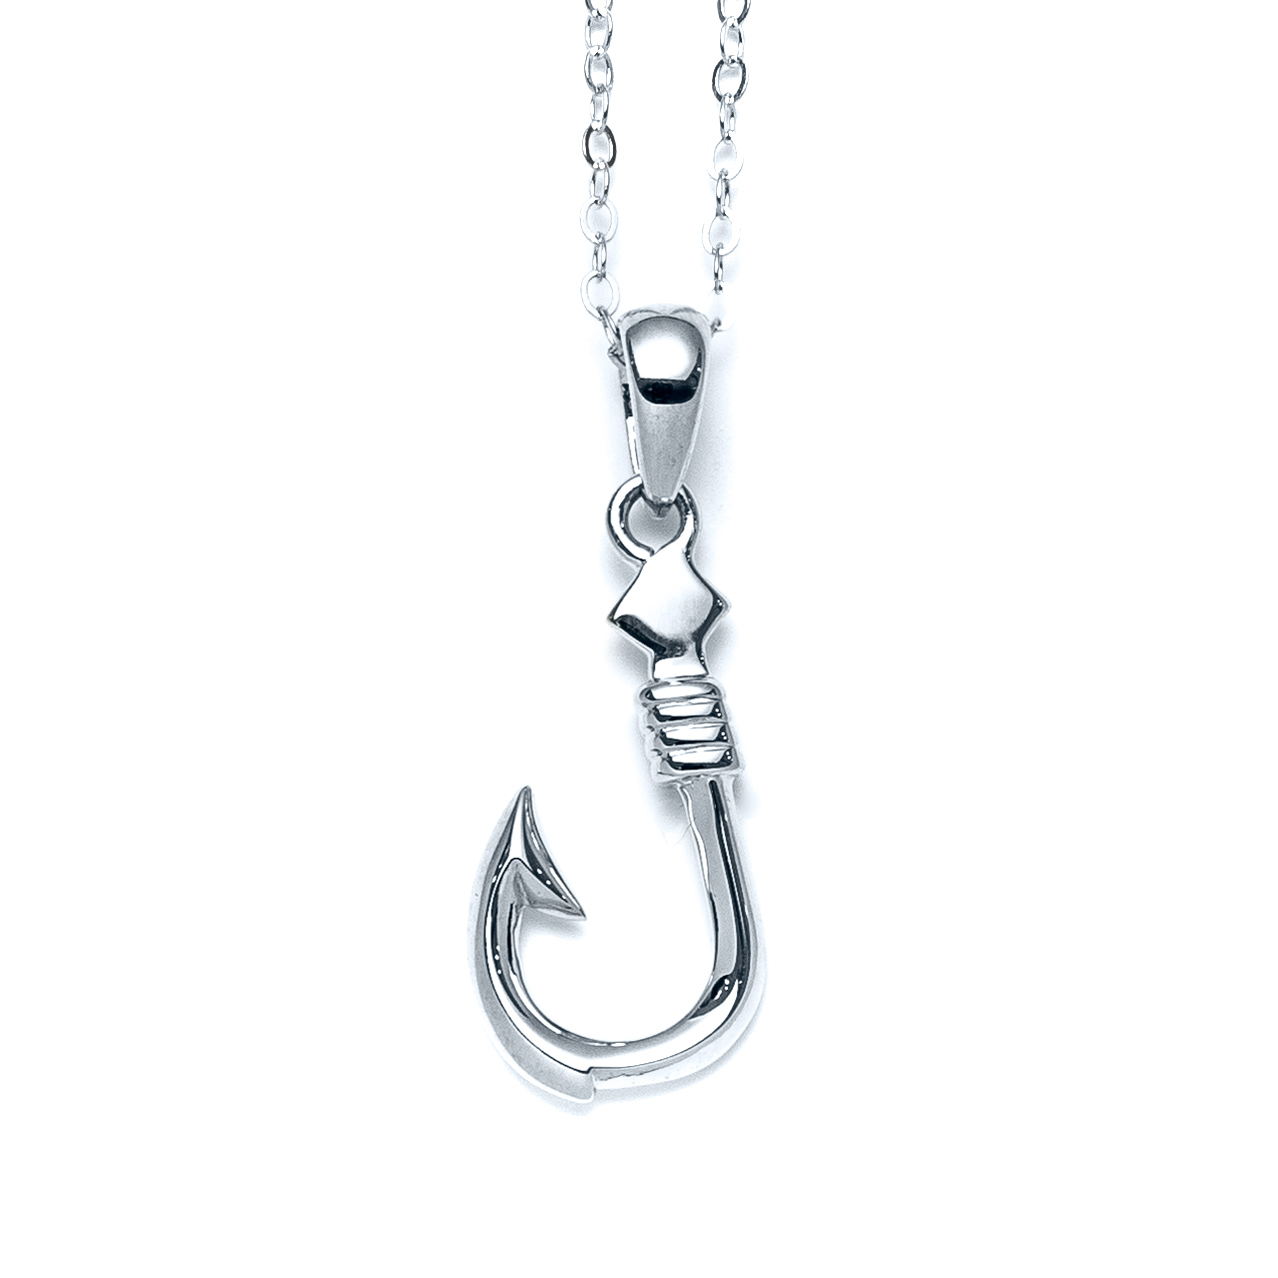 Fishing Jewelry | Fishing Necklace Men and Women will Love Great Gifts for  a Fisherman and Fish Gifts for Men as a Gift for a Fisherman or Fish